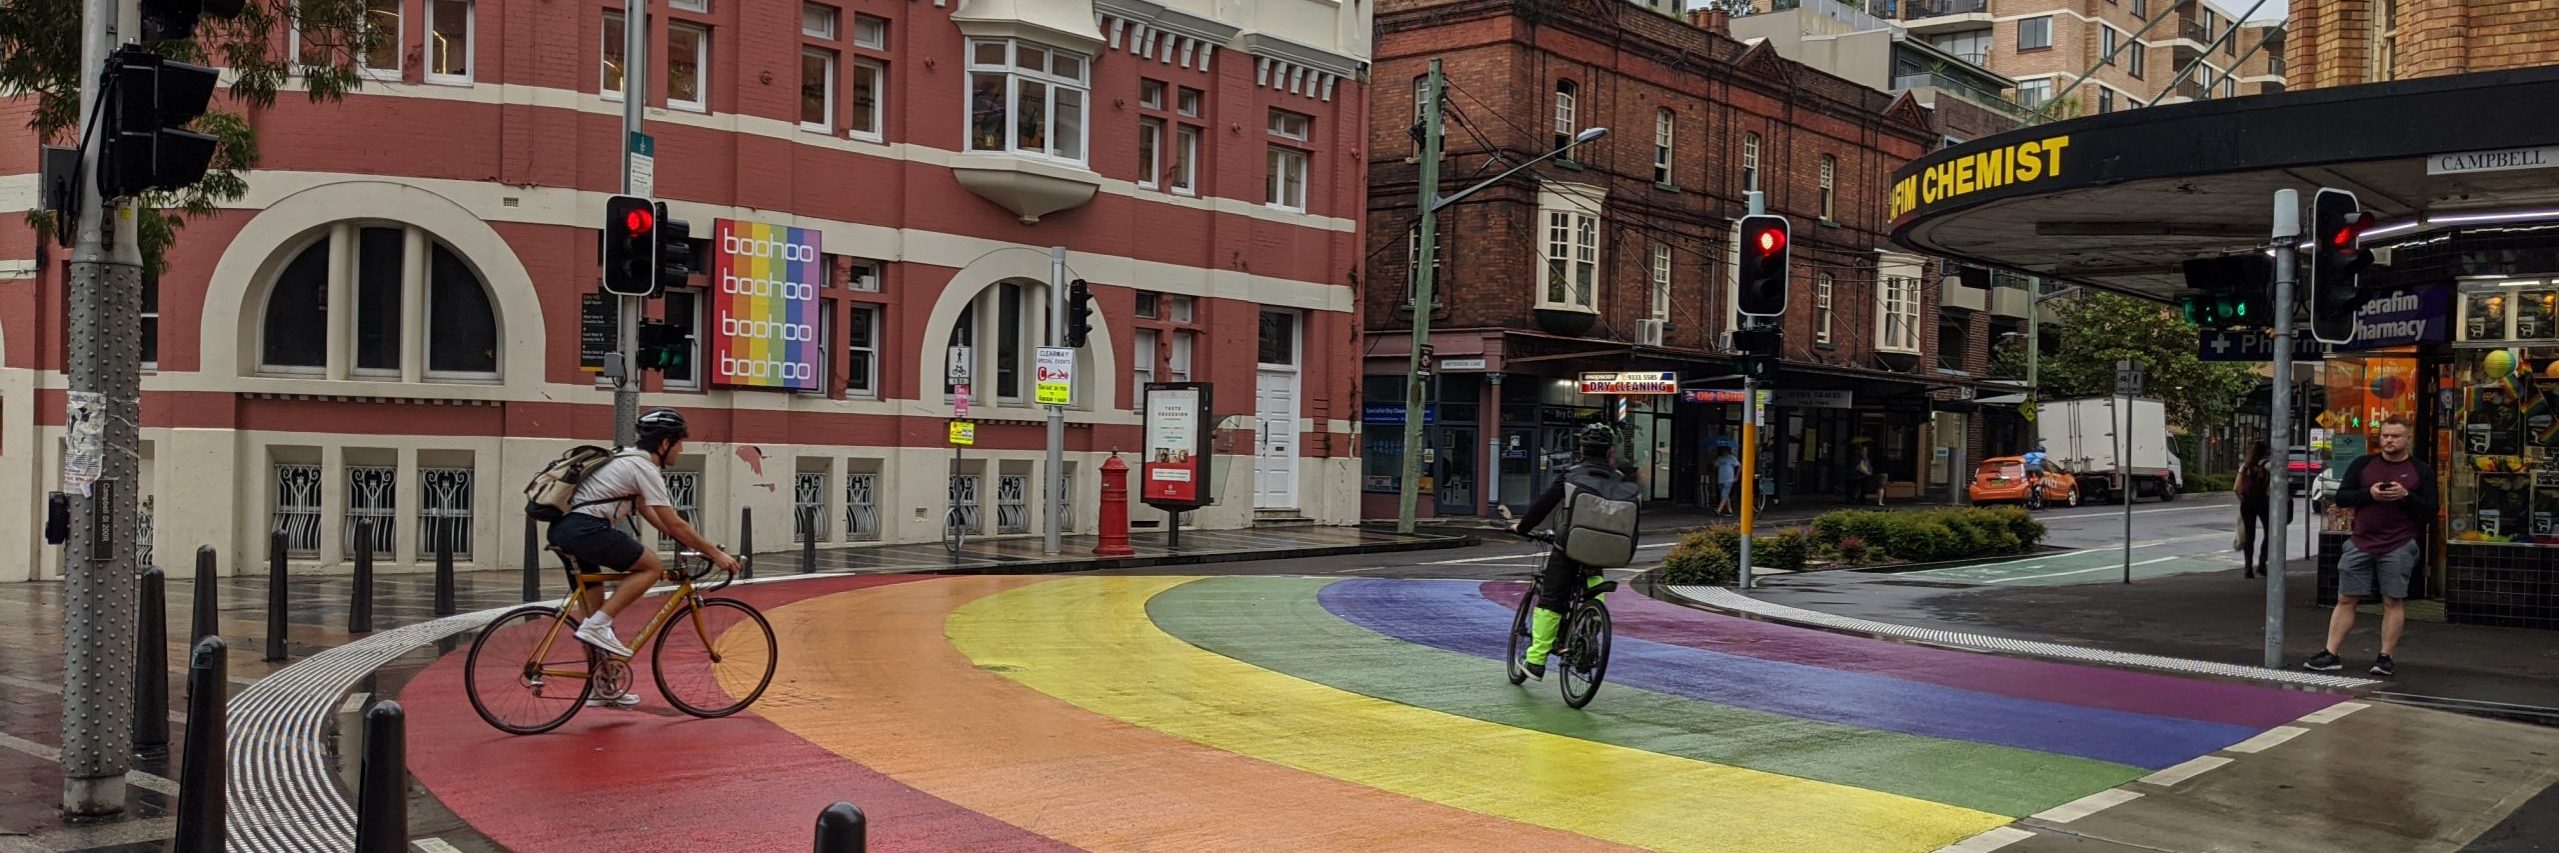 Rainbow Crossing at Taylor Square in Sydney, NSW, Australia. Image source: MDRX, via Wikimedia Commons